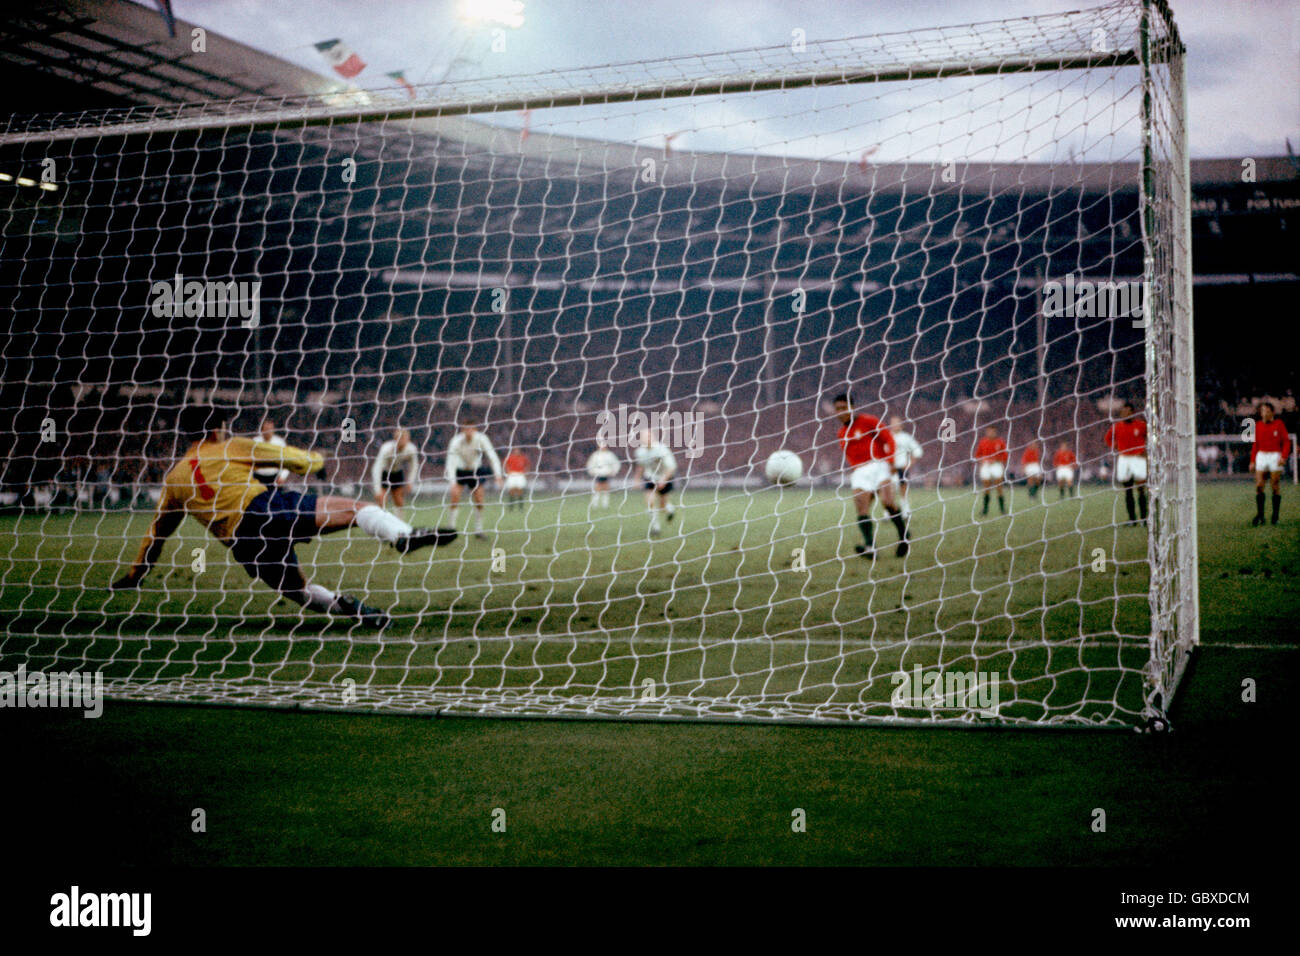 Portugal's Eusebio (r) sends England goalkeeper Gordon Banks (l) the wrong way from the penalty spot to score his team's goal Stock Photo